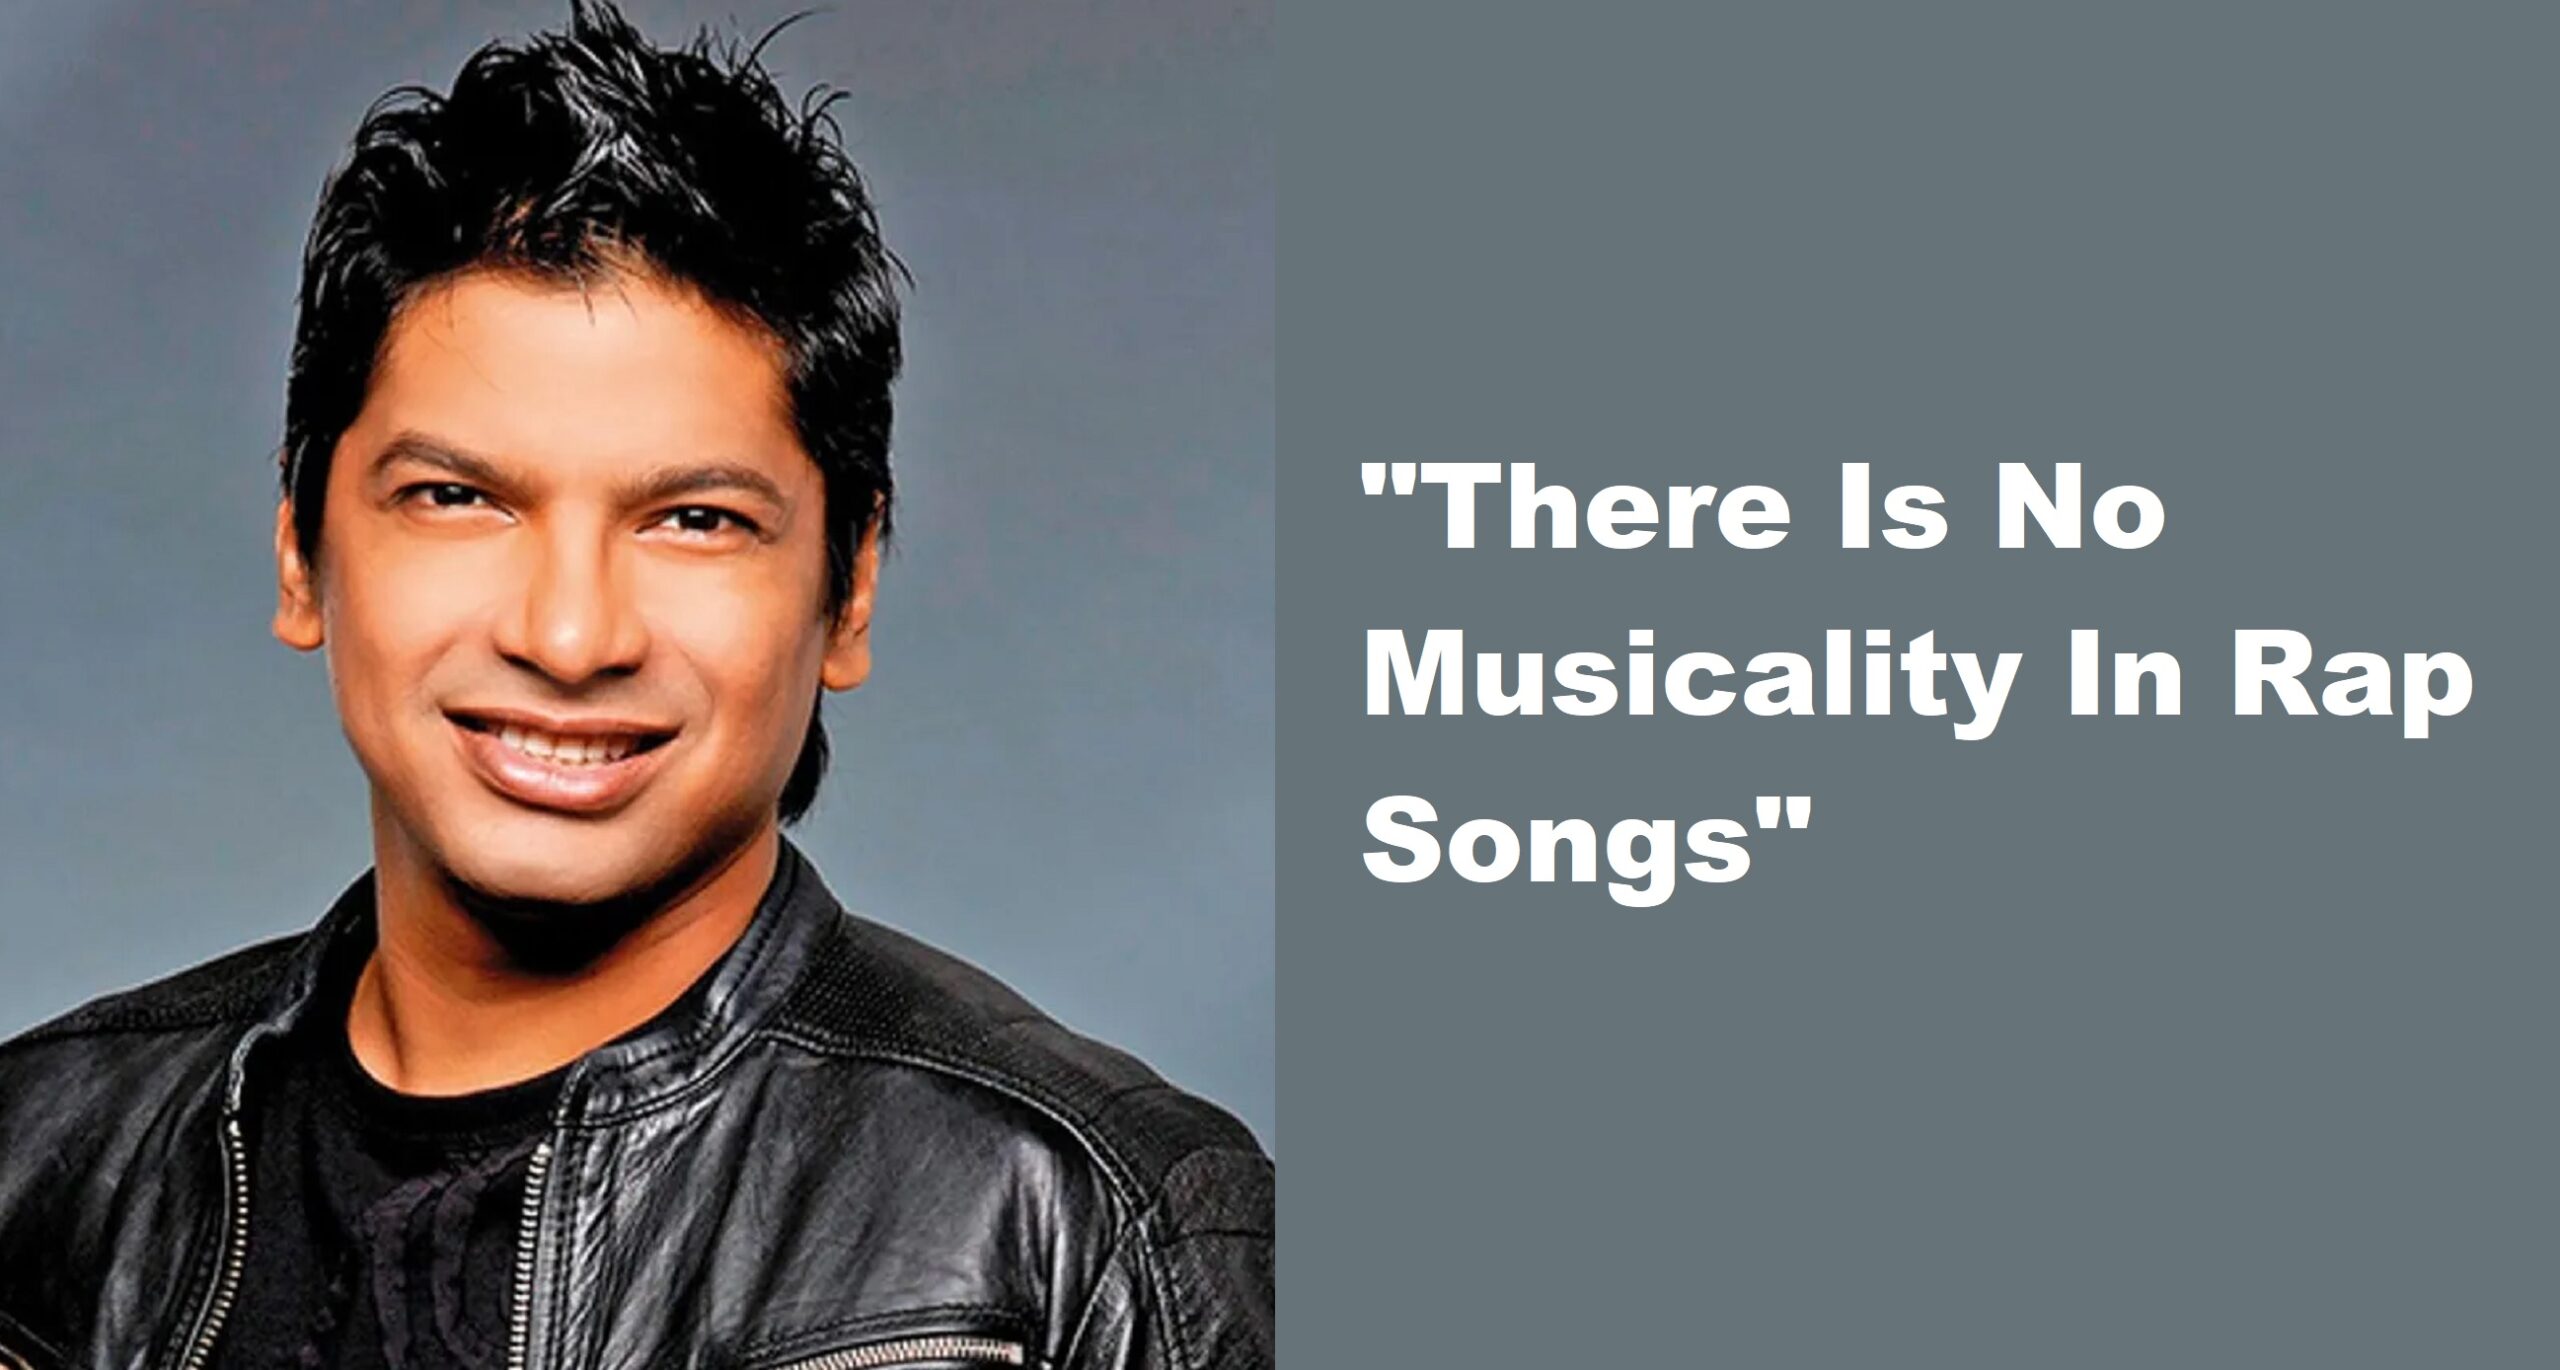 “Why is rap music so popular today? Anyone can sing songs like “Chaar botal vodka'”, Says Shaan